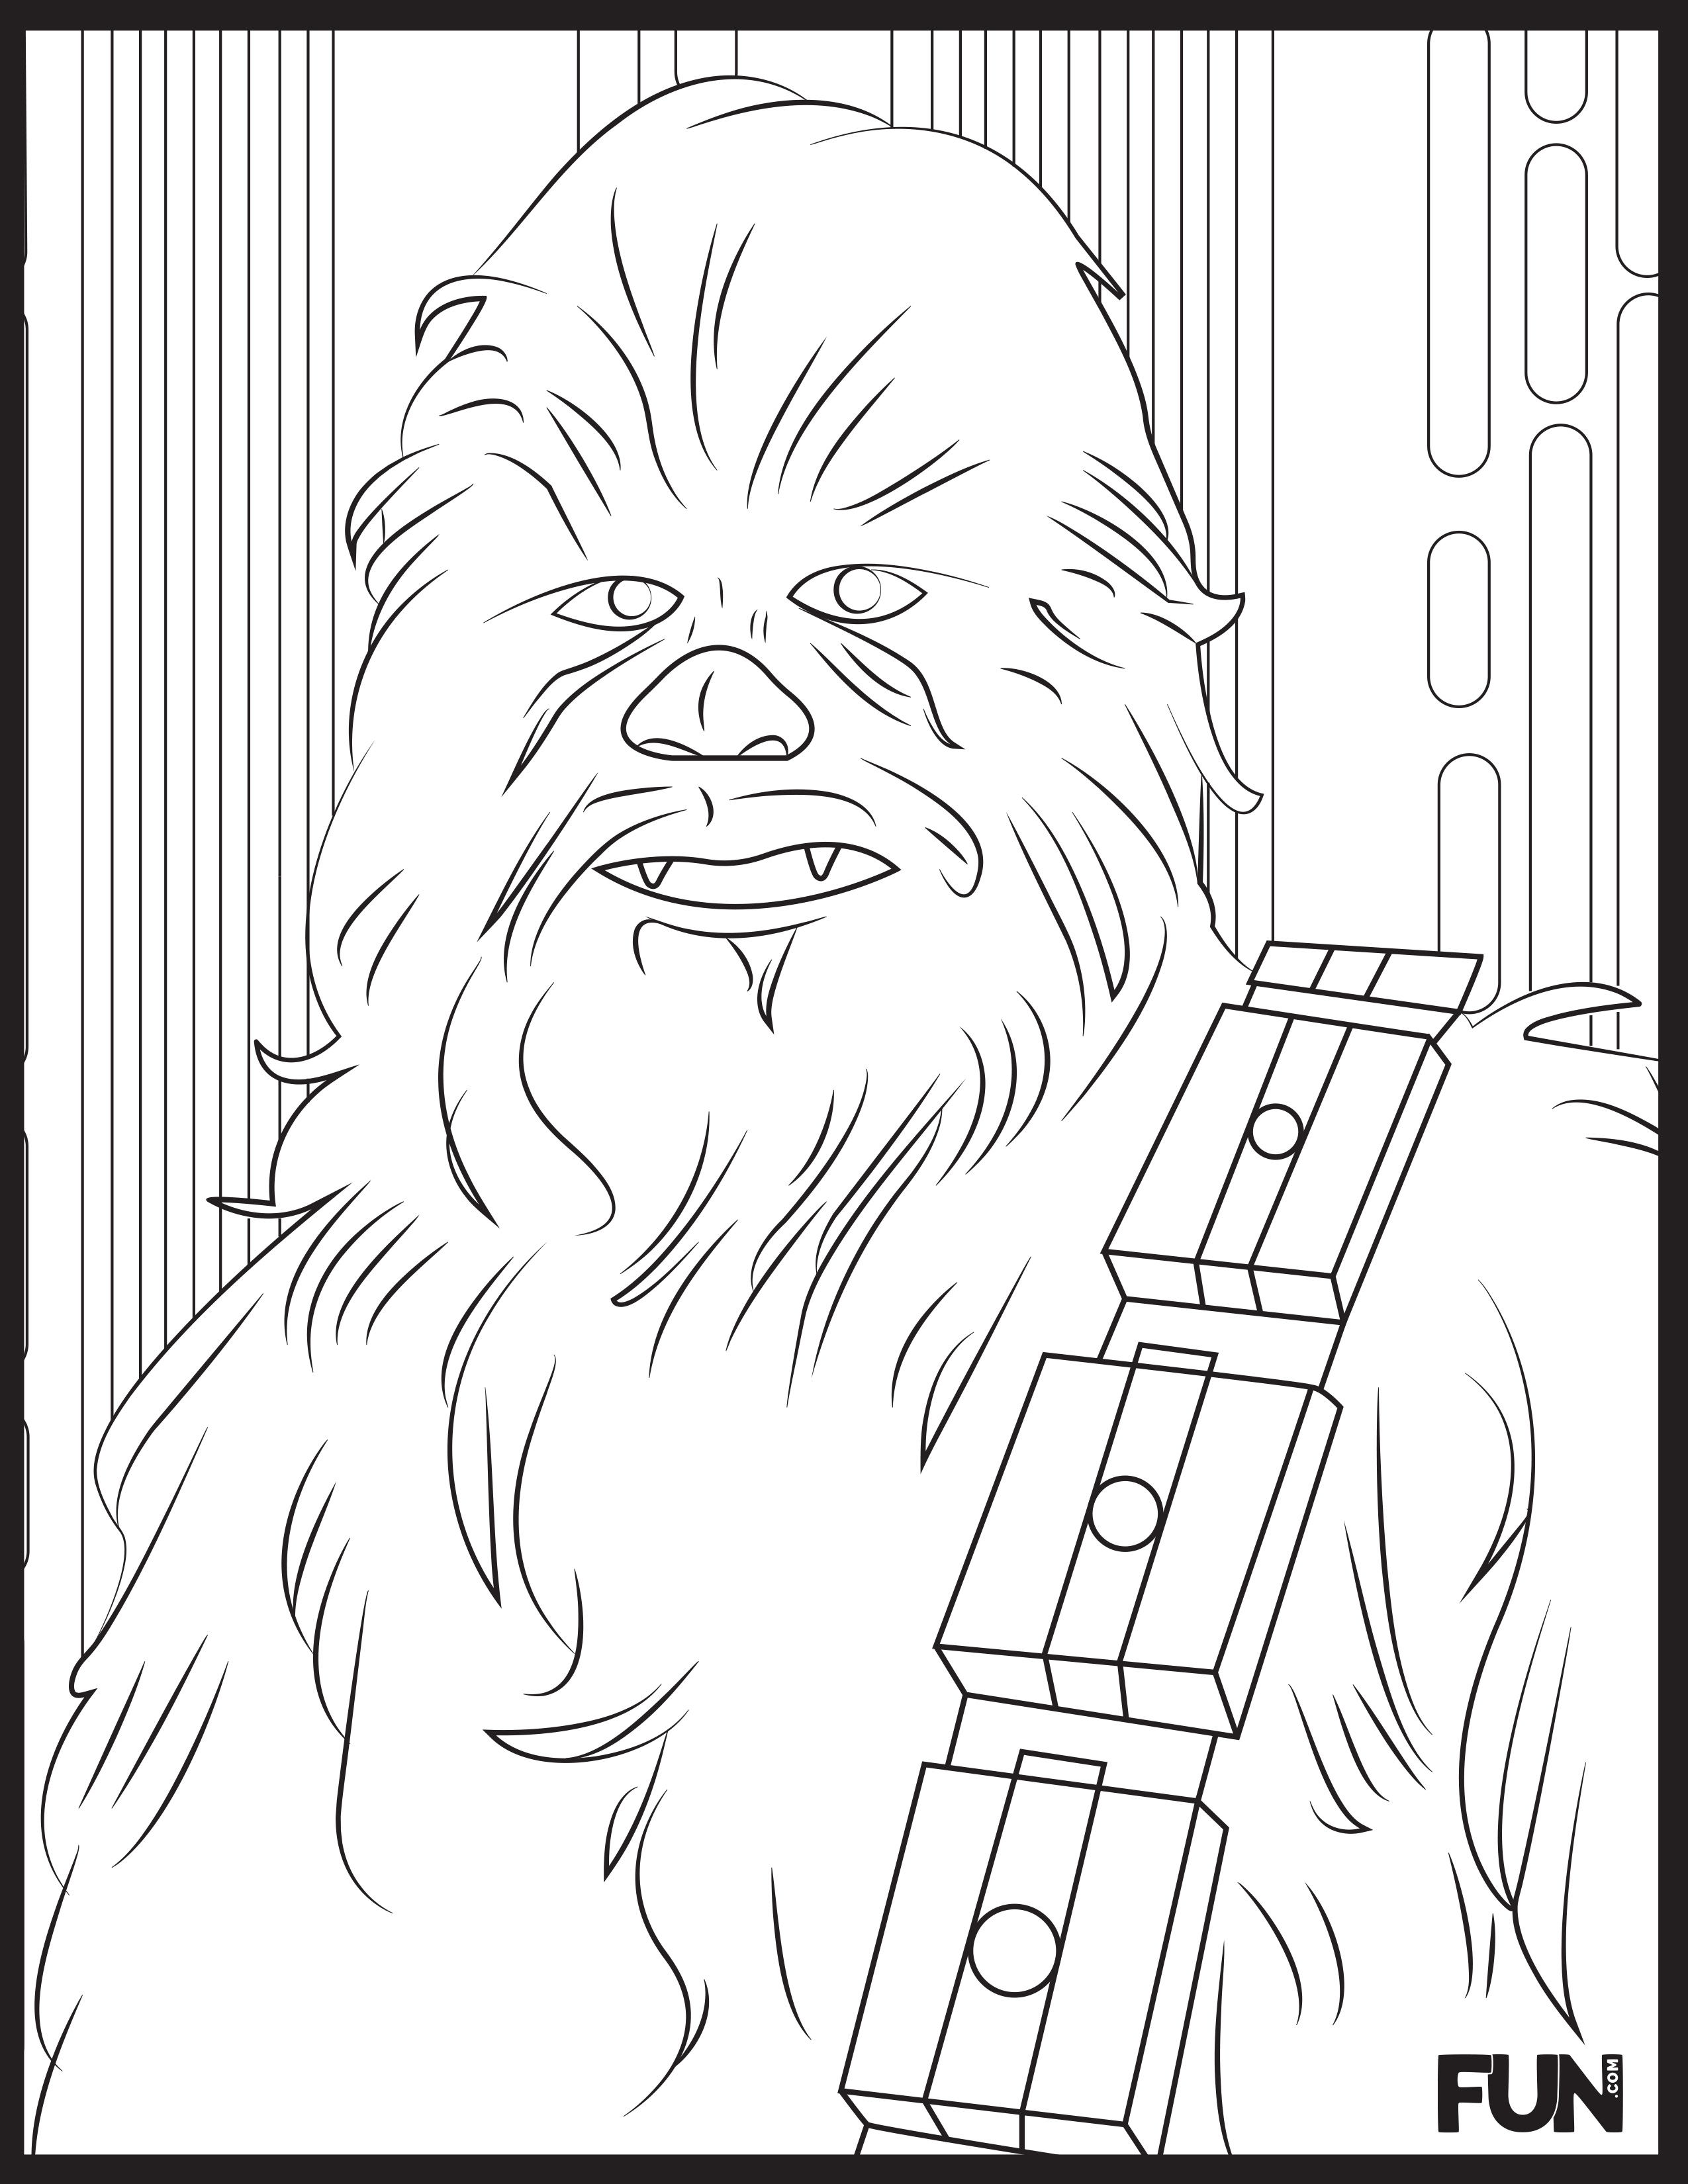 Star wars coloring pages and bingo sheets printables